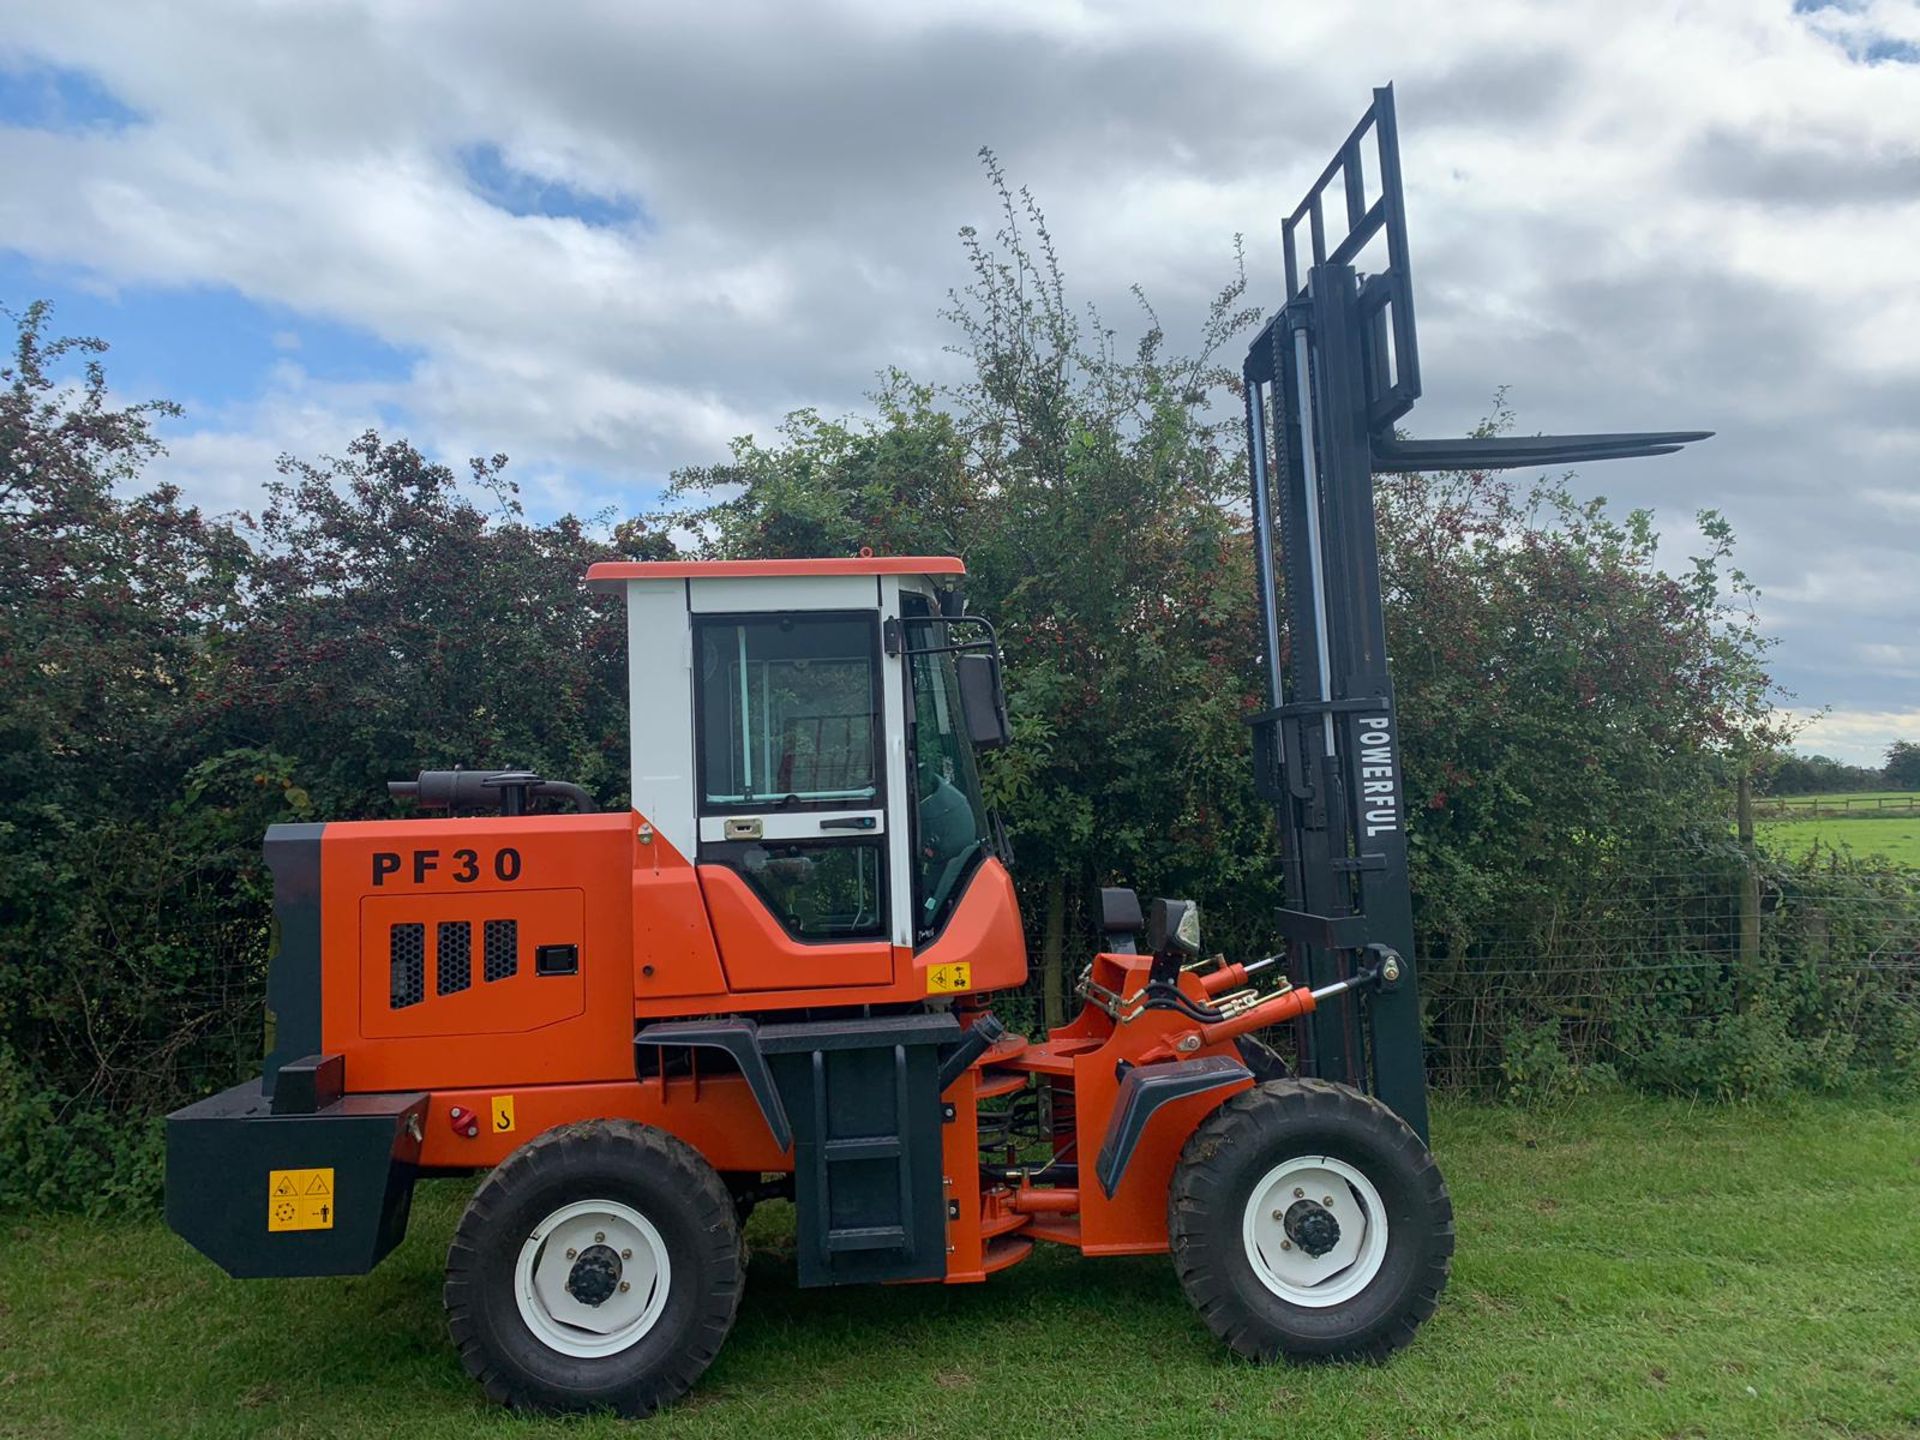 BRAND NEW 2019 POWERFUL PF30 4X4 ROUGH TERRAIN POWERFUL FORKLIFT C/W 2 STAGE MAST *PLUS VAT* - Image 2 of 12